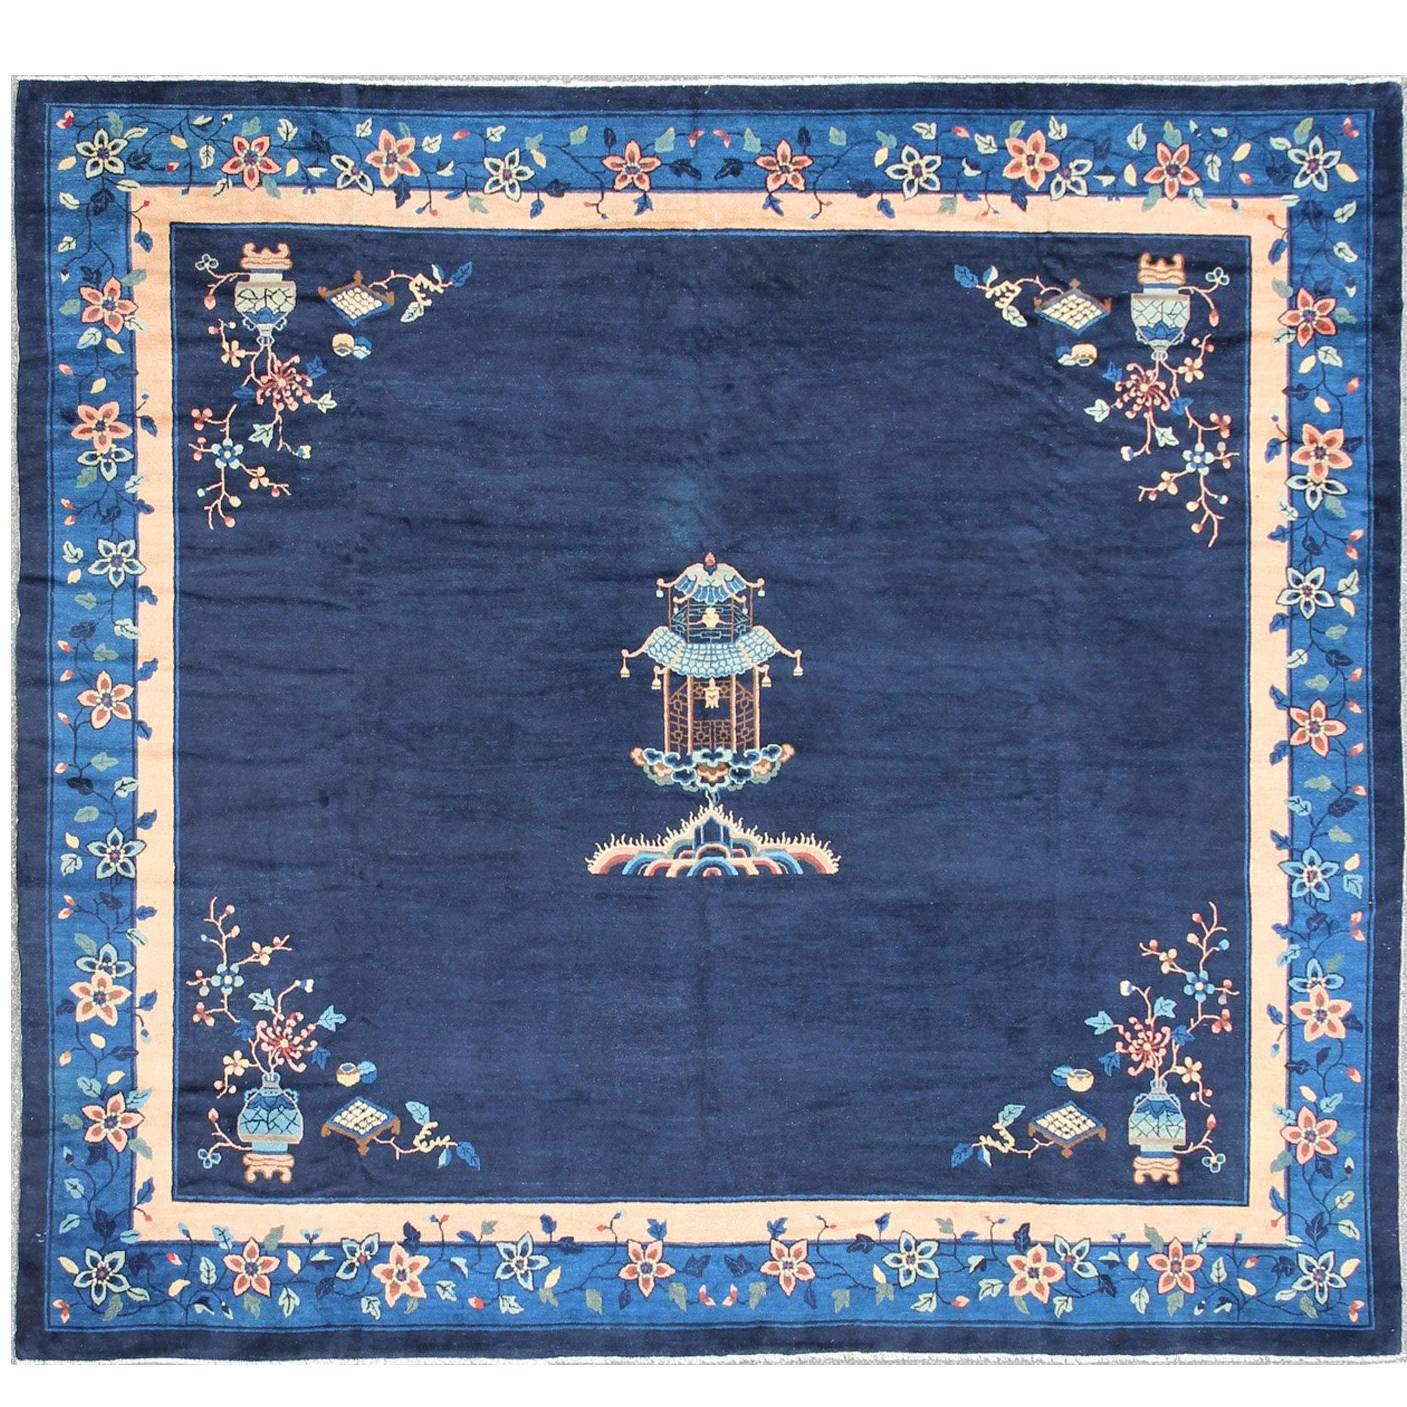 Large Chinese Rug in Sapphire Tones with Ornate Floral Motifs